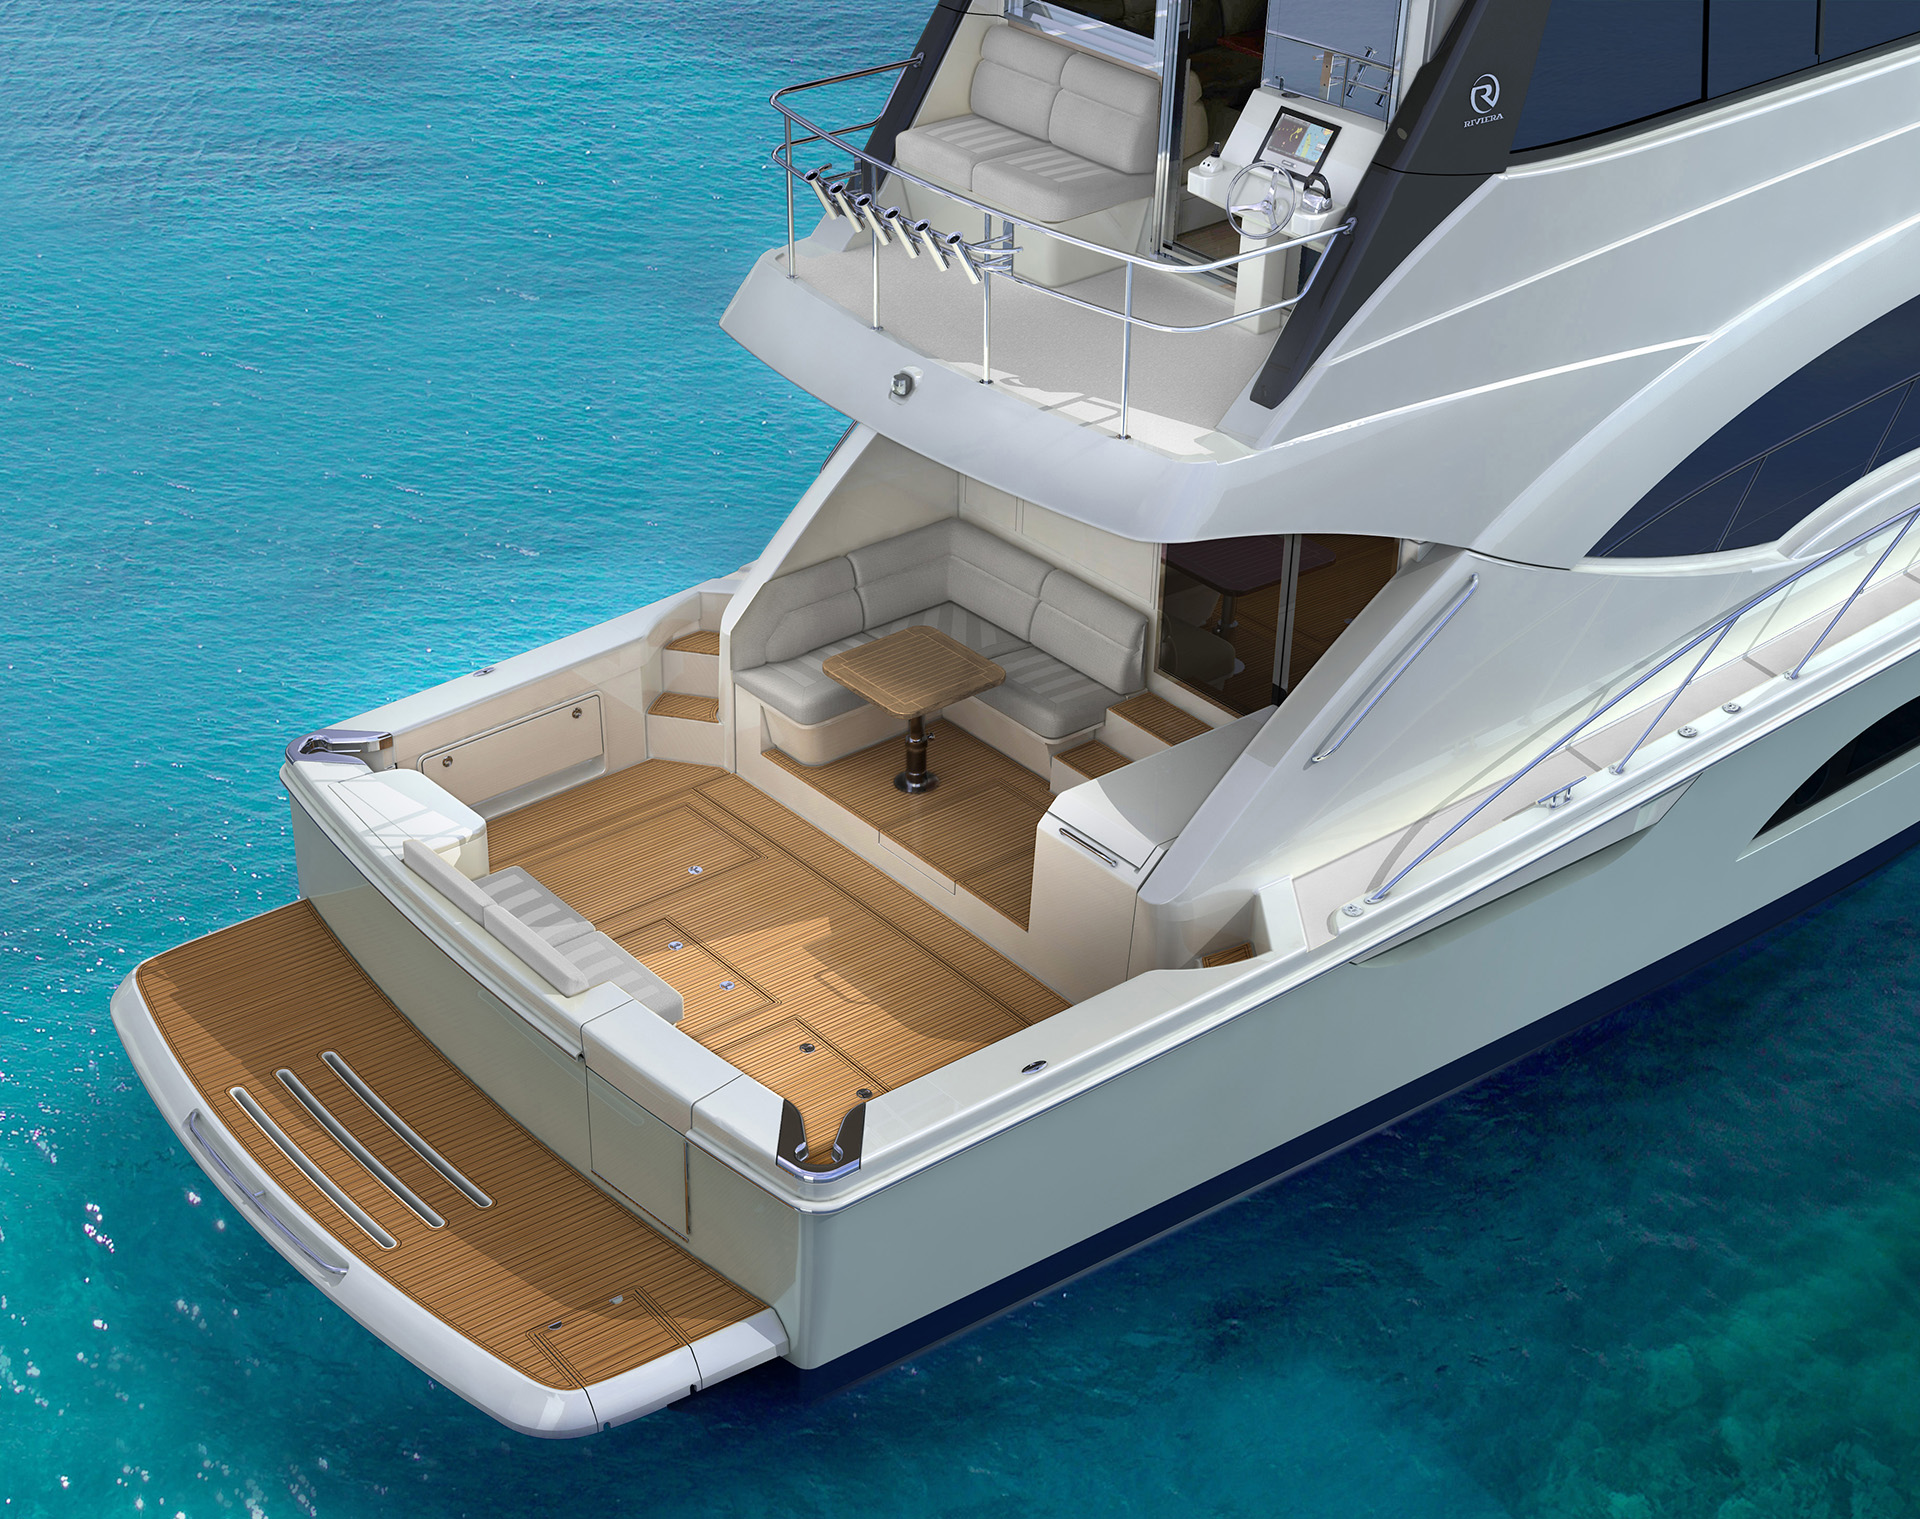 With a new and distinctive design, the Riviera 57 Enclosed Flybridge retains the indoor outdoor characteristics and cockpit connectivity of which Riviera has made an art form